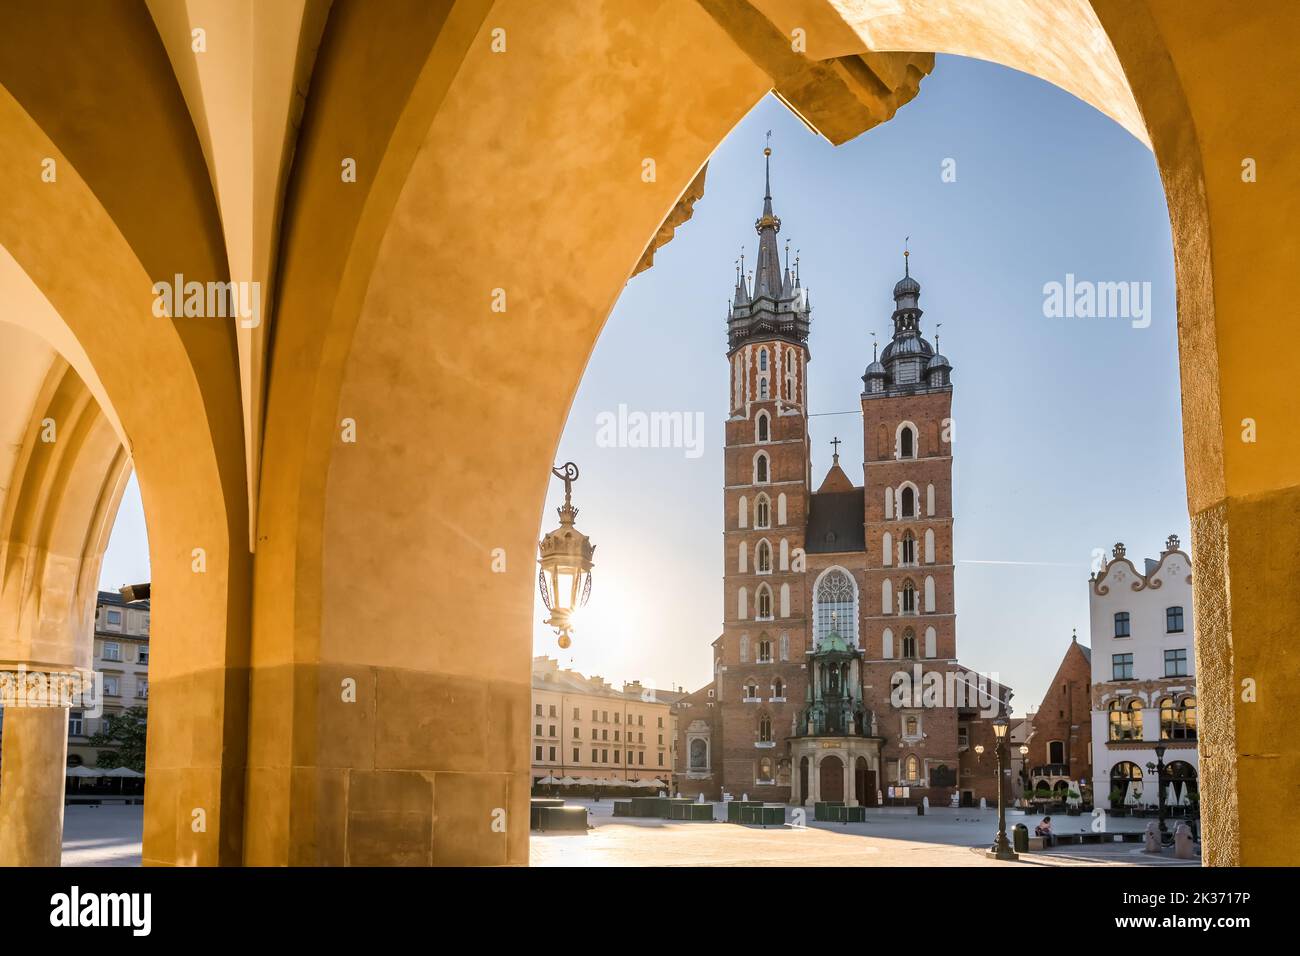 Krakow cloth hall and Saint Mary's Basilica on the main market square at sunrise in Cracow, Poland. Stock Photo